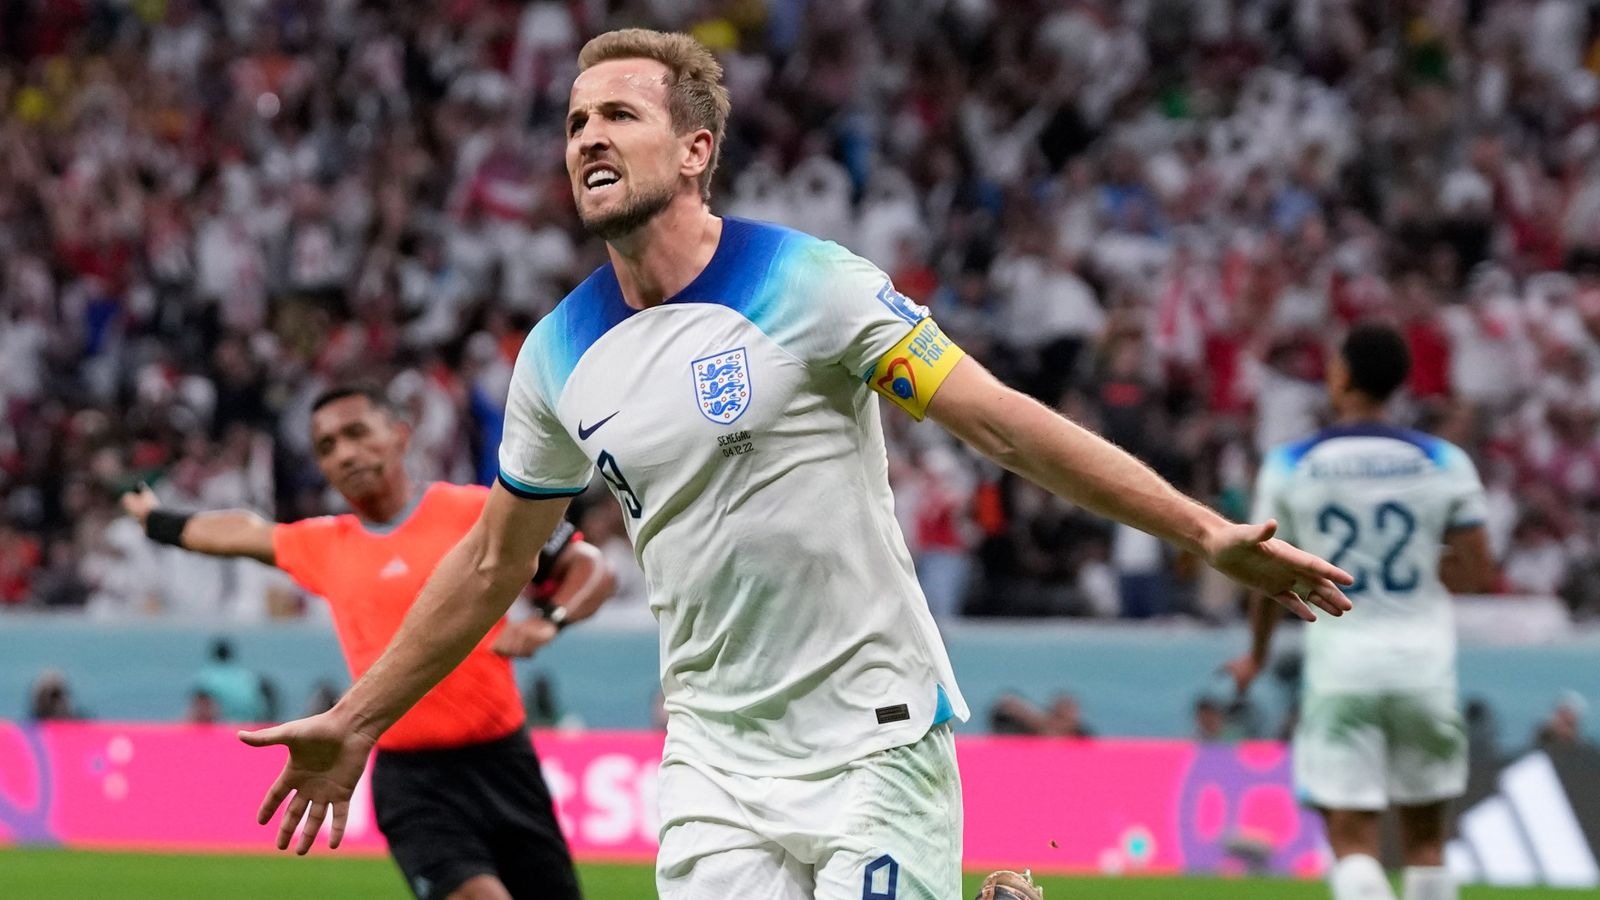 Harry Kane goal video: England striker puts team up 3-0 vs. Senegal at half  time of 2022 World Cup - DraftKings Network